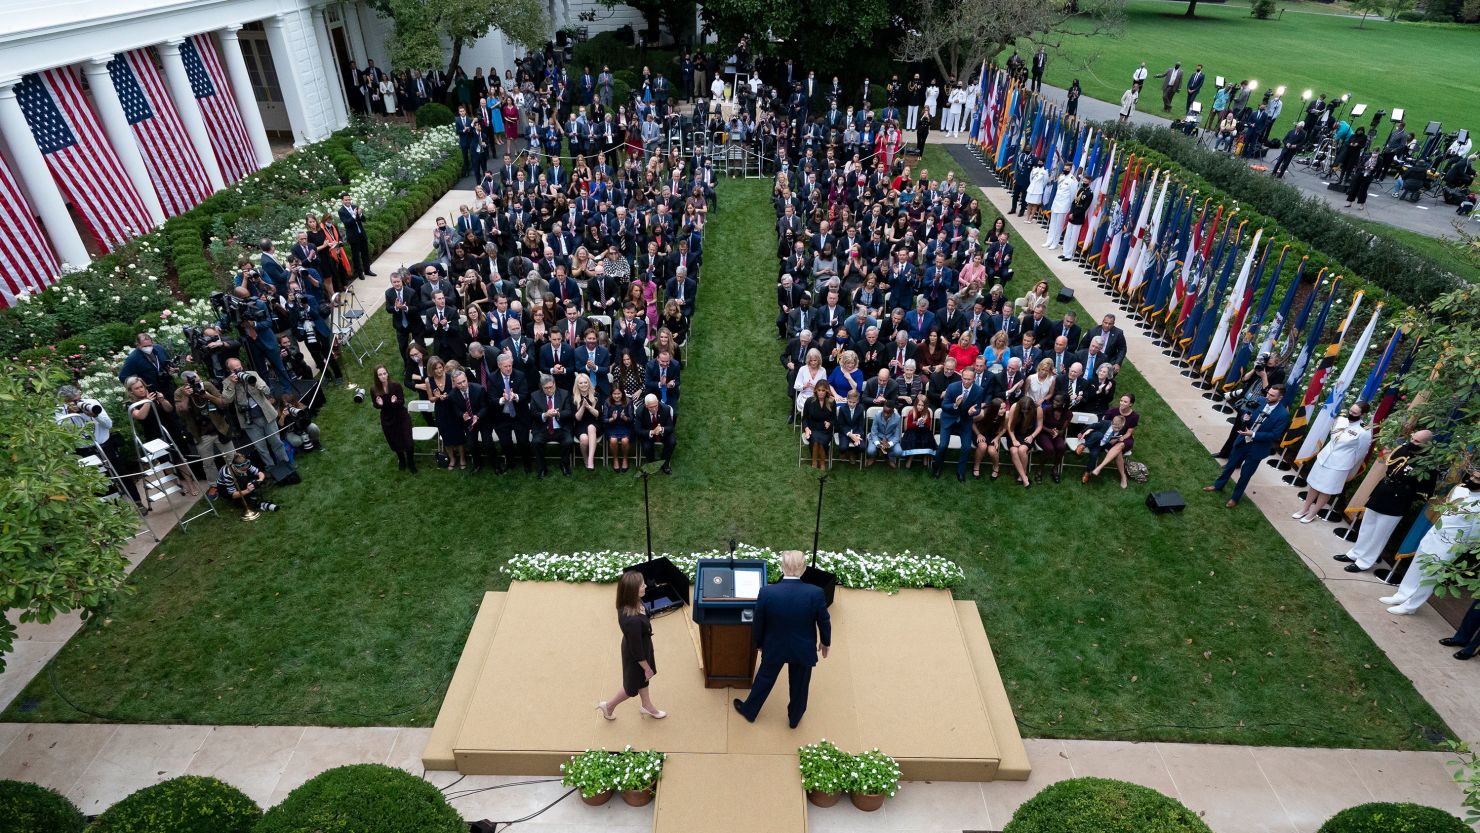 Judge Amy Coney Barrett walks to the microphone after President Donald Trump, right, announced Barrett as his nominee to the Supreme Court, in the Rose Garden at the White House on Sept. 26, 2020. Fr. John Jenkins can be seen seated in the right section, third row.